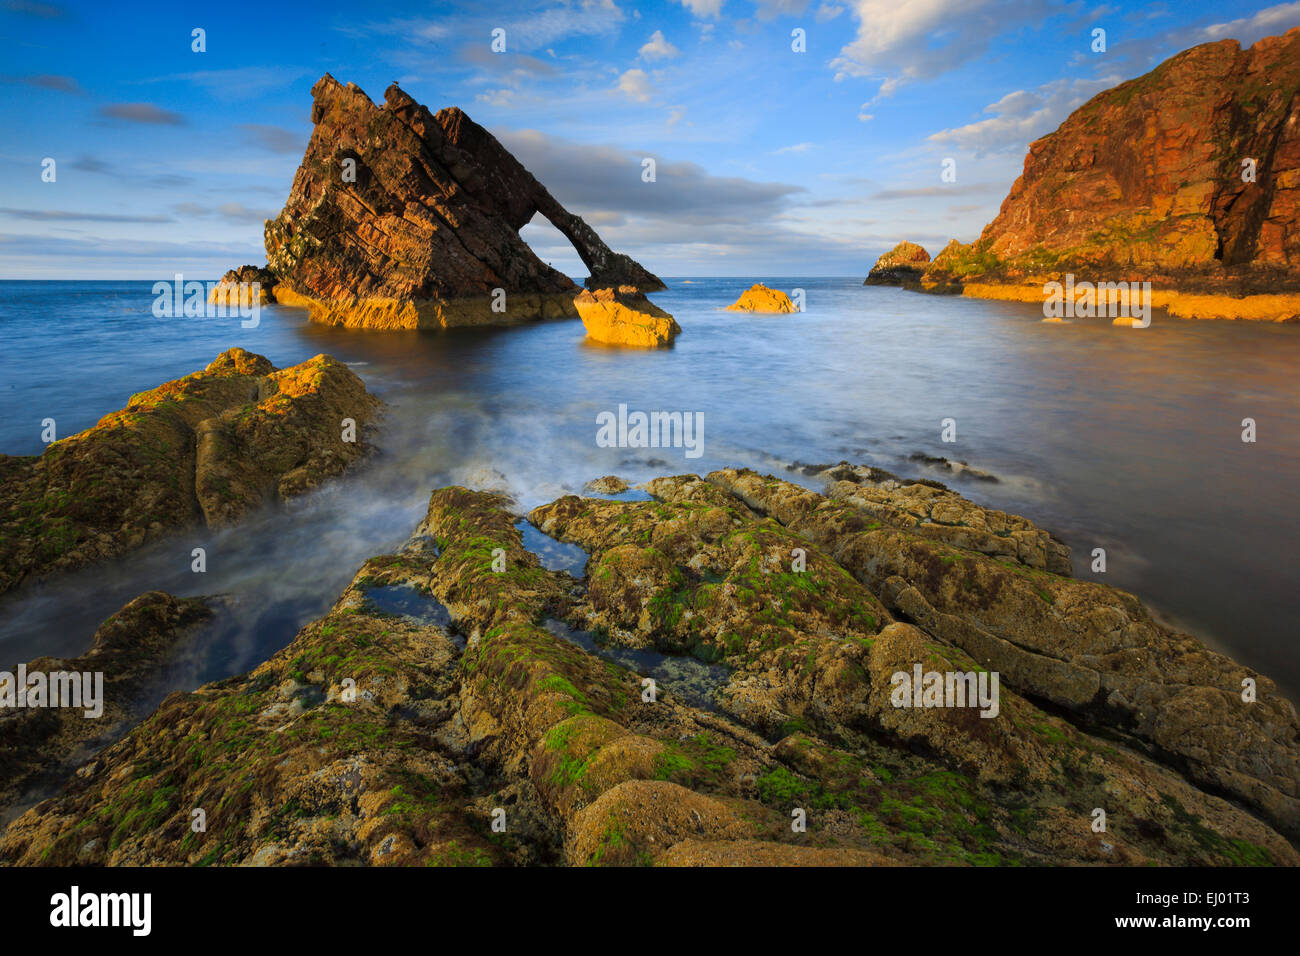 Arch, curve, Bow Fiddle, Bow Fiddle rock, cliff, rock, cliff, water, Great Britain, cliffs, coast, scenery, landscape, sea, Moray Stock Photo